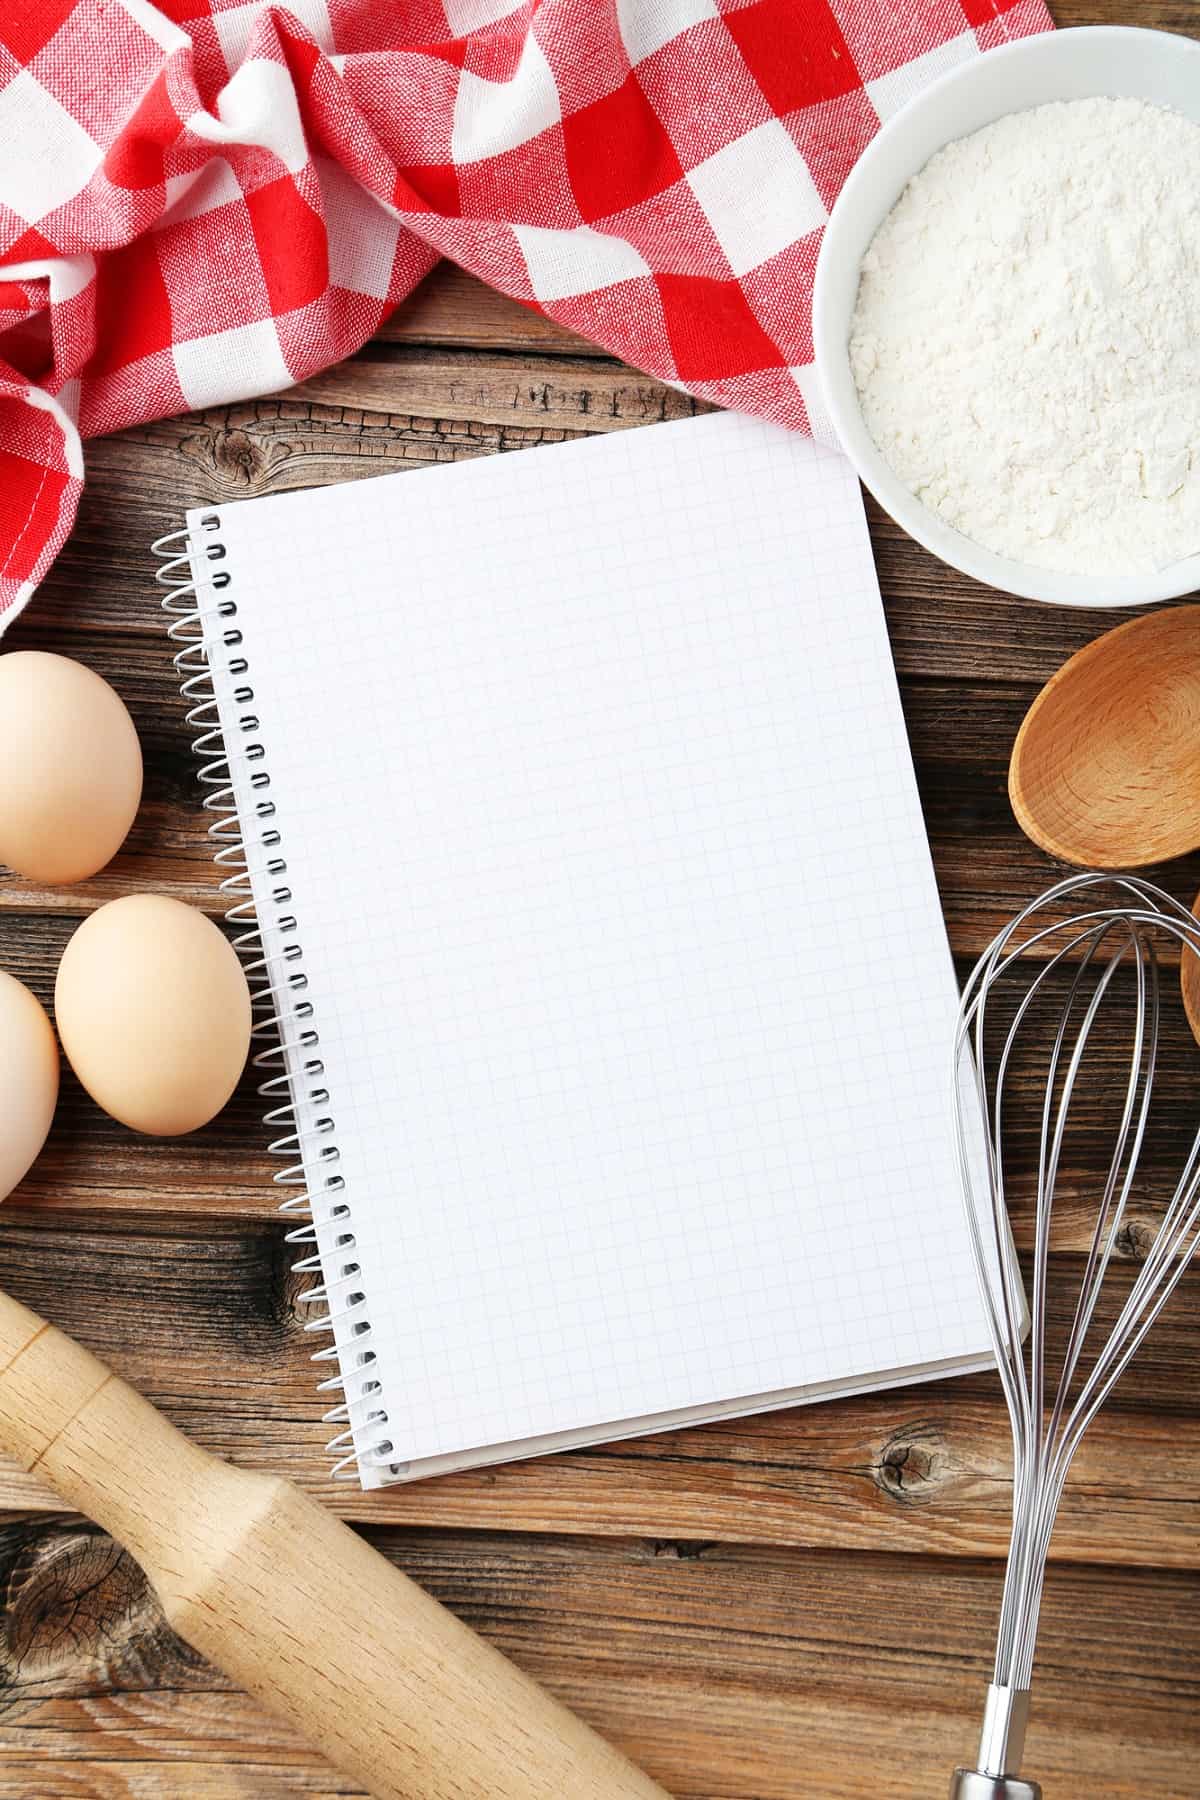 Recipe book with whisk and baking ingredients.